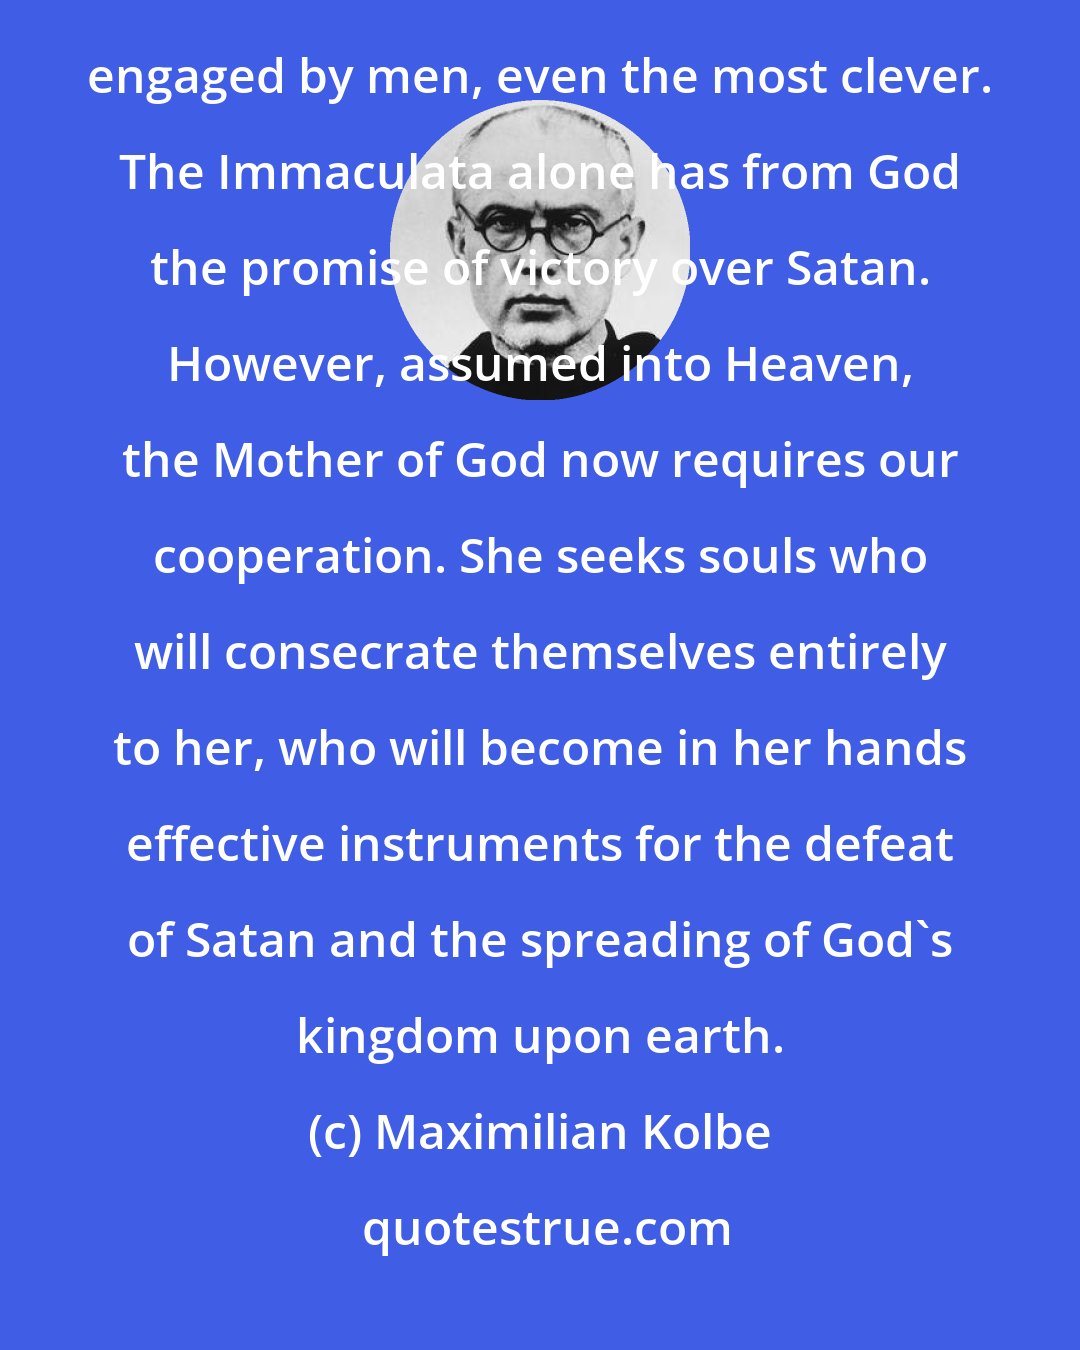 Maximilian Kolbe: Modern times are dominated by Satan and will be more so in the future. The conflict with hell cannot be engaged by men, even the most clever. The Immaculata alone has from God the promise of victory over Satan. However, assumed into Heaven, the Mother of God now requires our cooperation. She seeks souls who will consecrate themselves entirely to her, who will become in her hands effective instruments for the defeat of Satan and the spreading of God's kingdom upon earth.